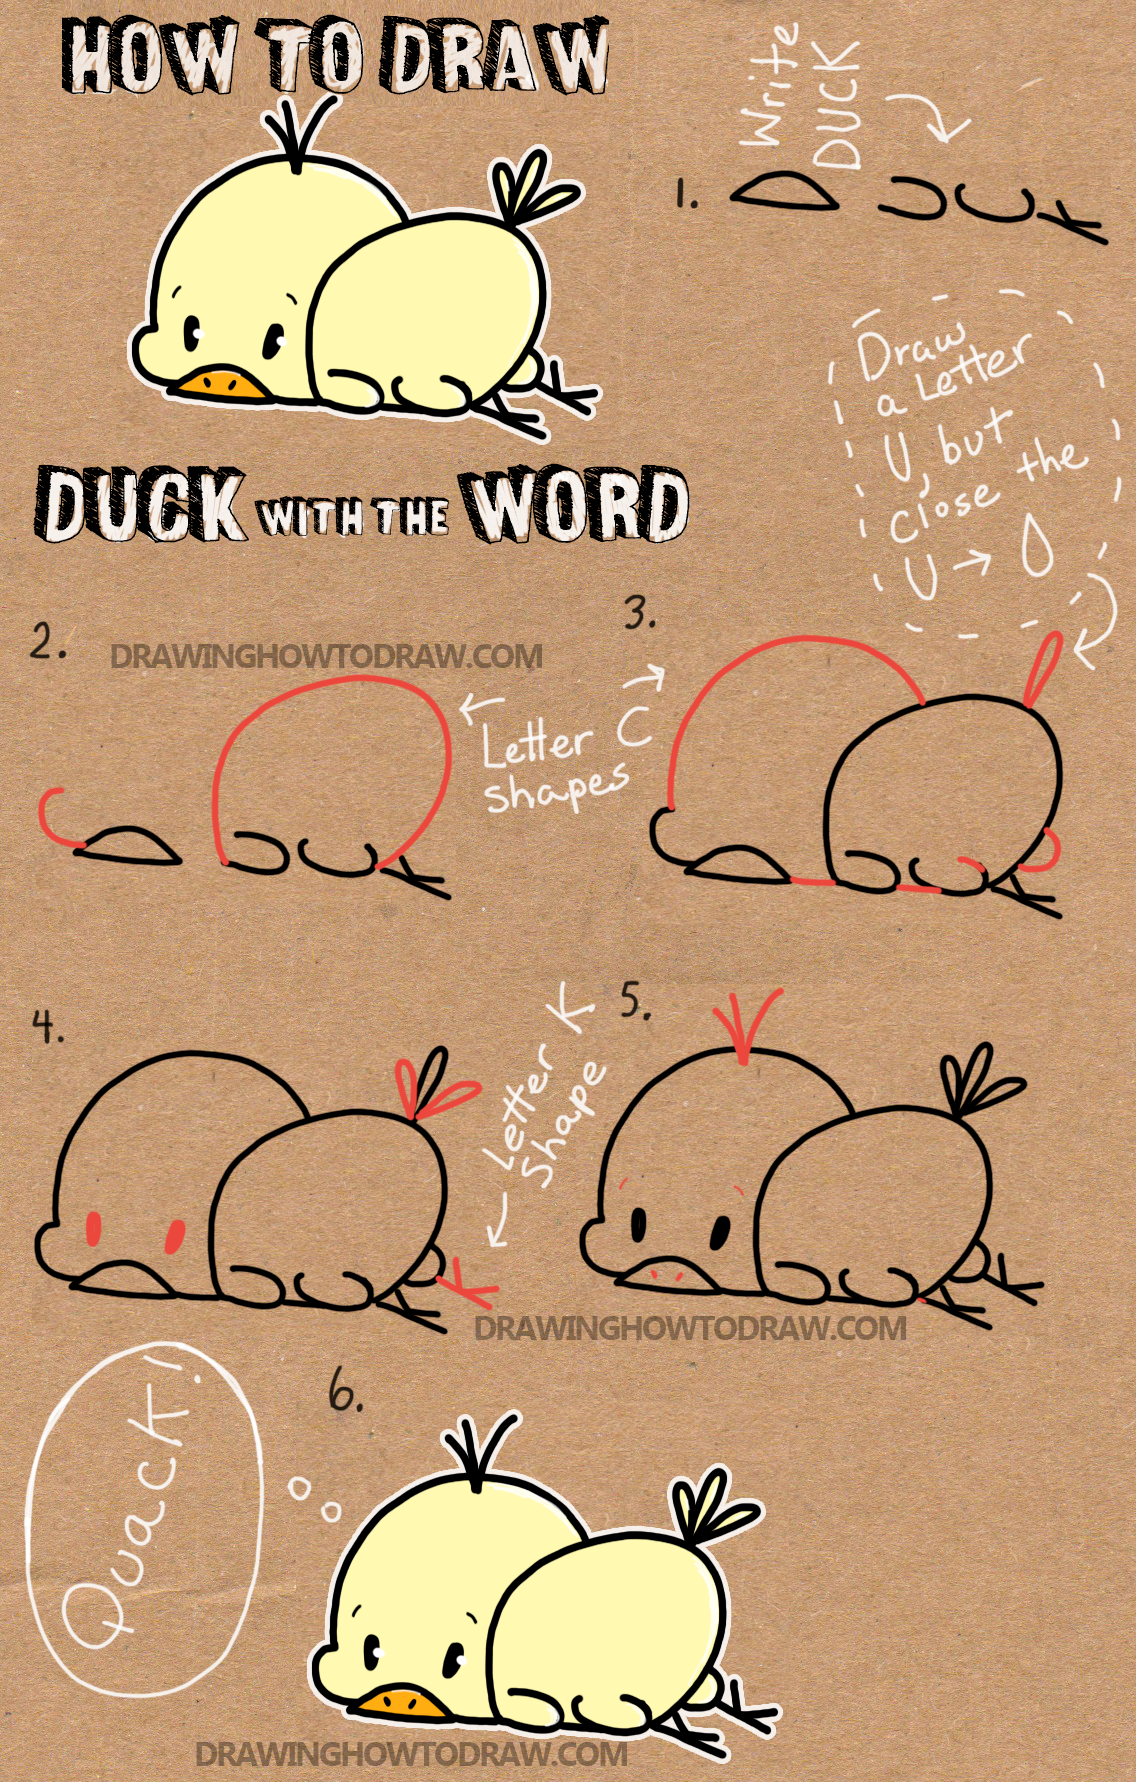 How to Draw Baby Cartoon Duck with the Word Duck Easy Tutorial for Kids -  How to Draw Step by Step Drawing Tutorials